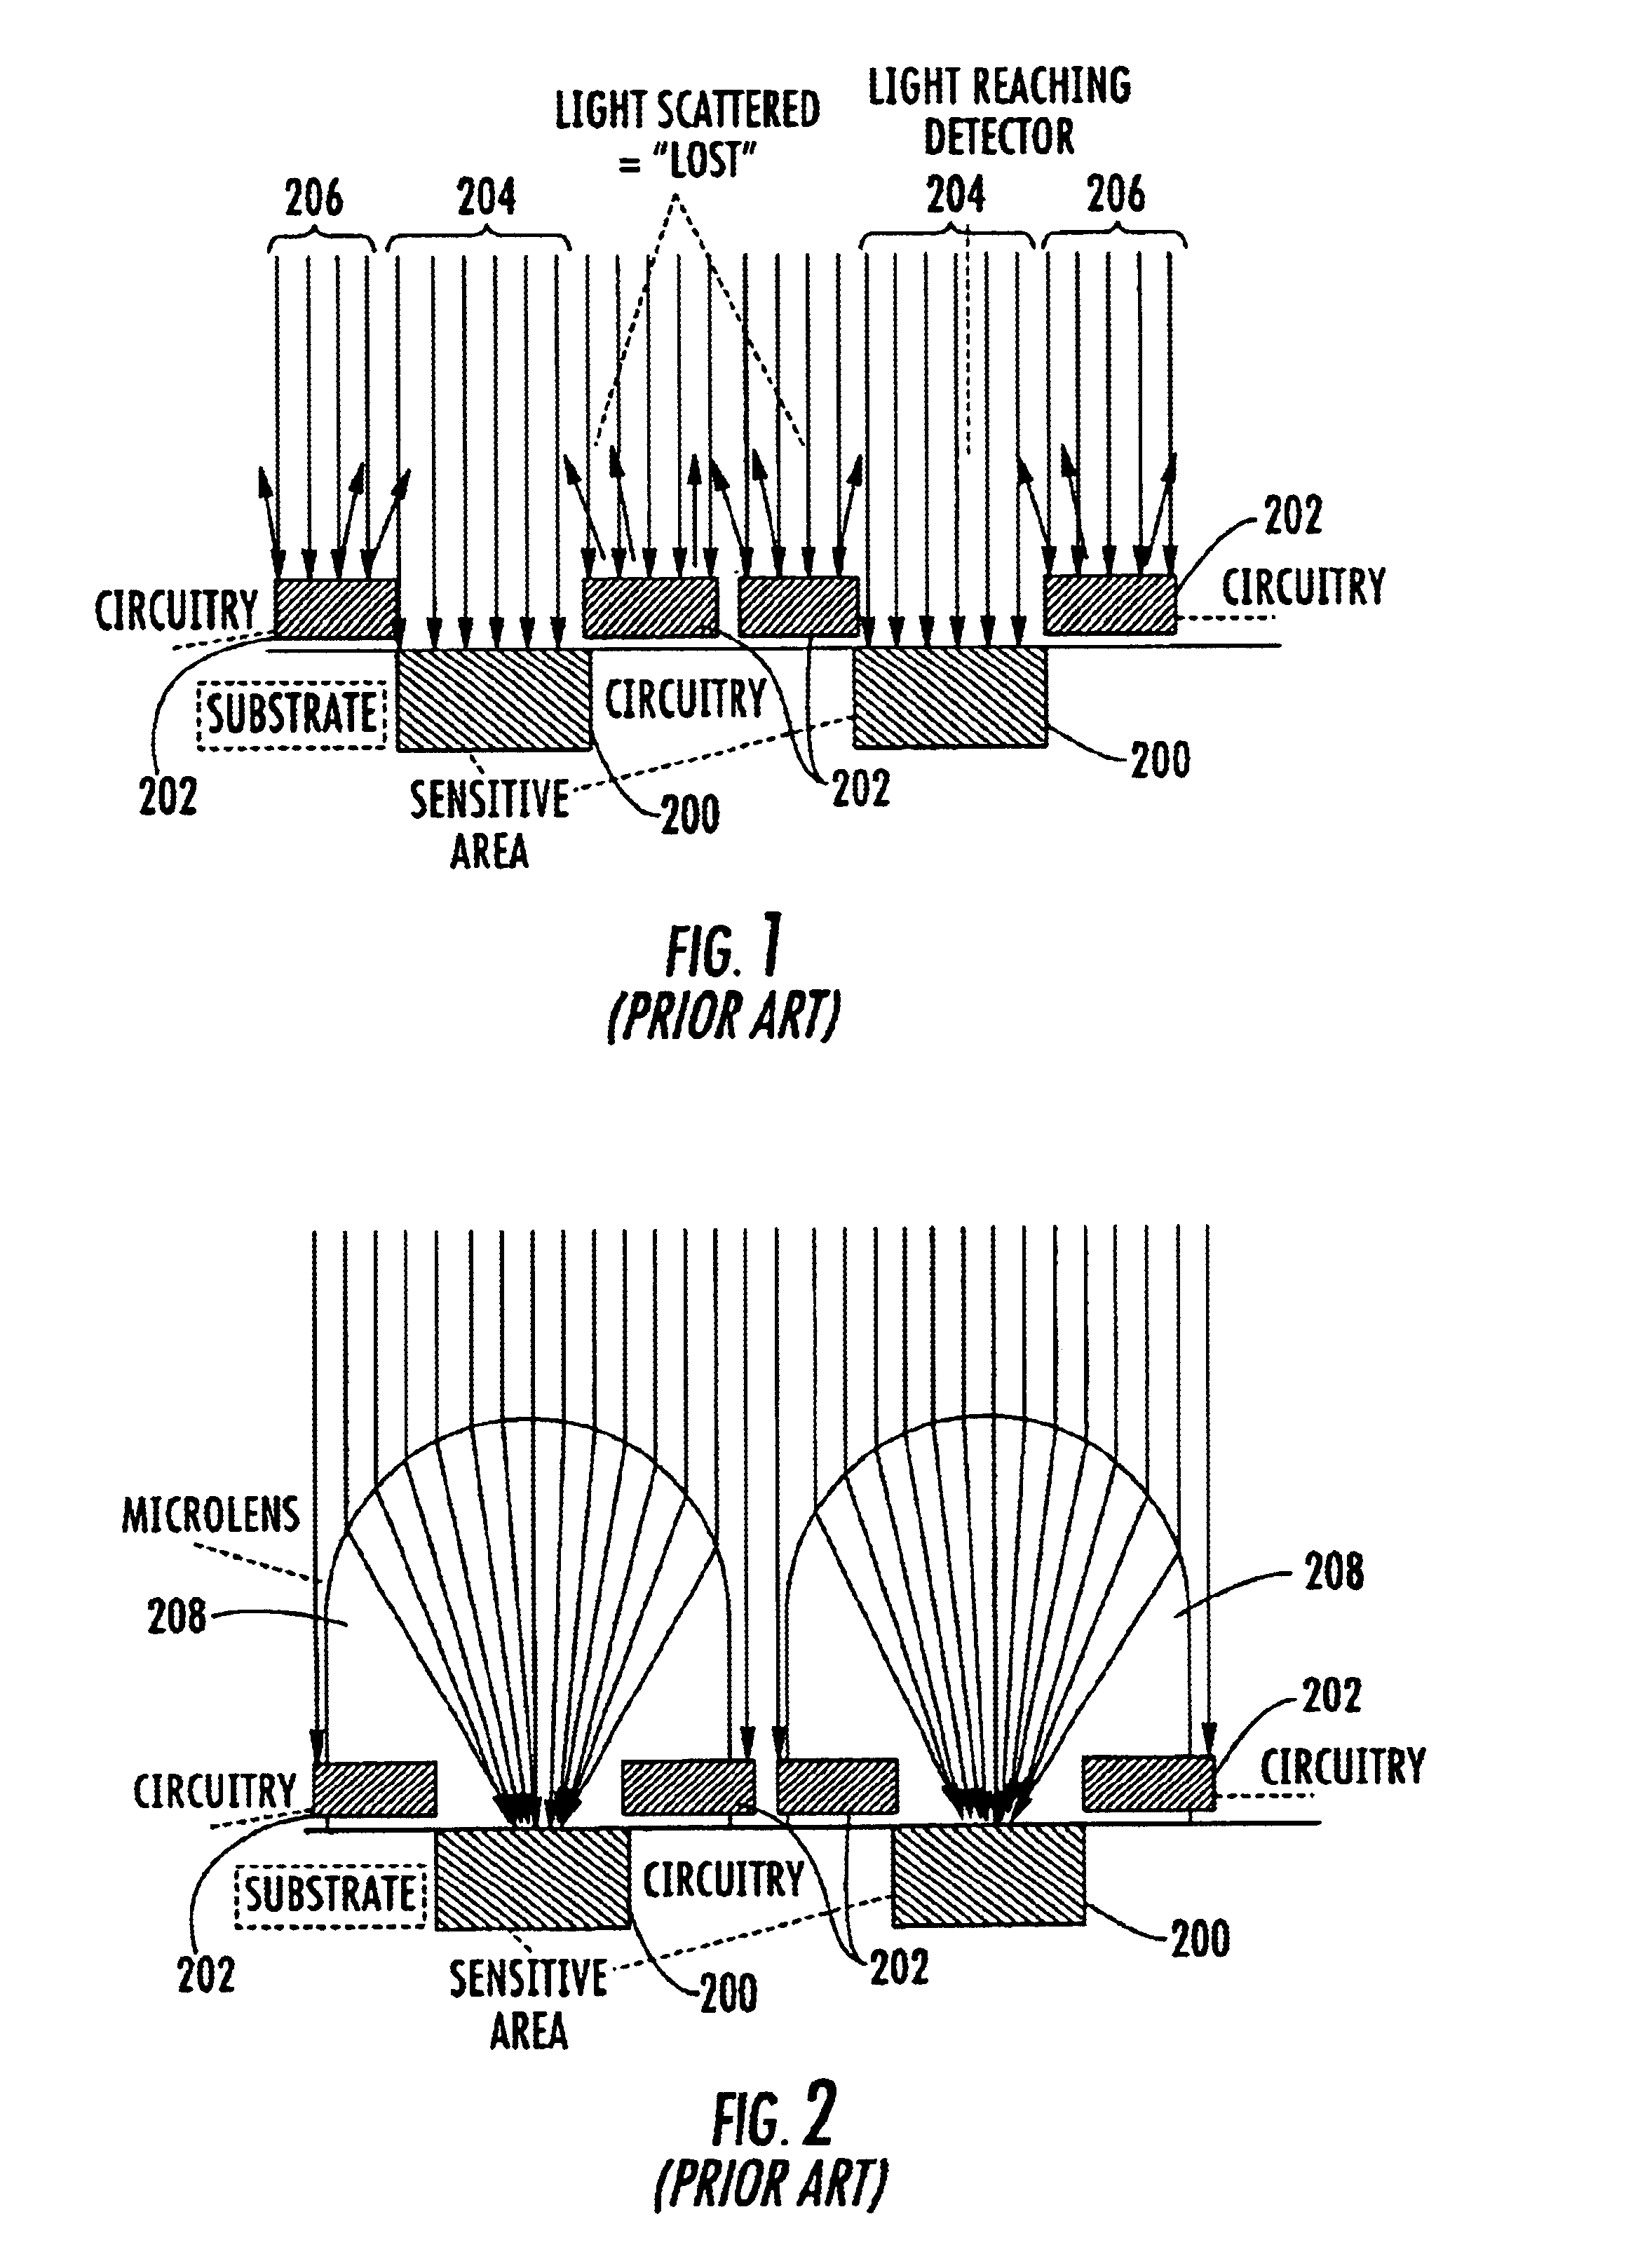 Solid state image sensors and microlens arrays